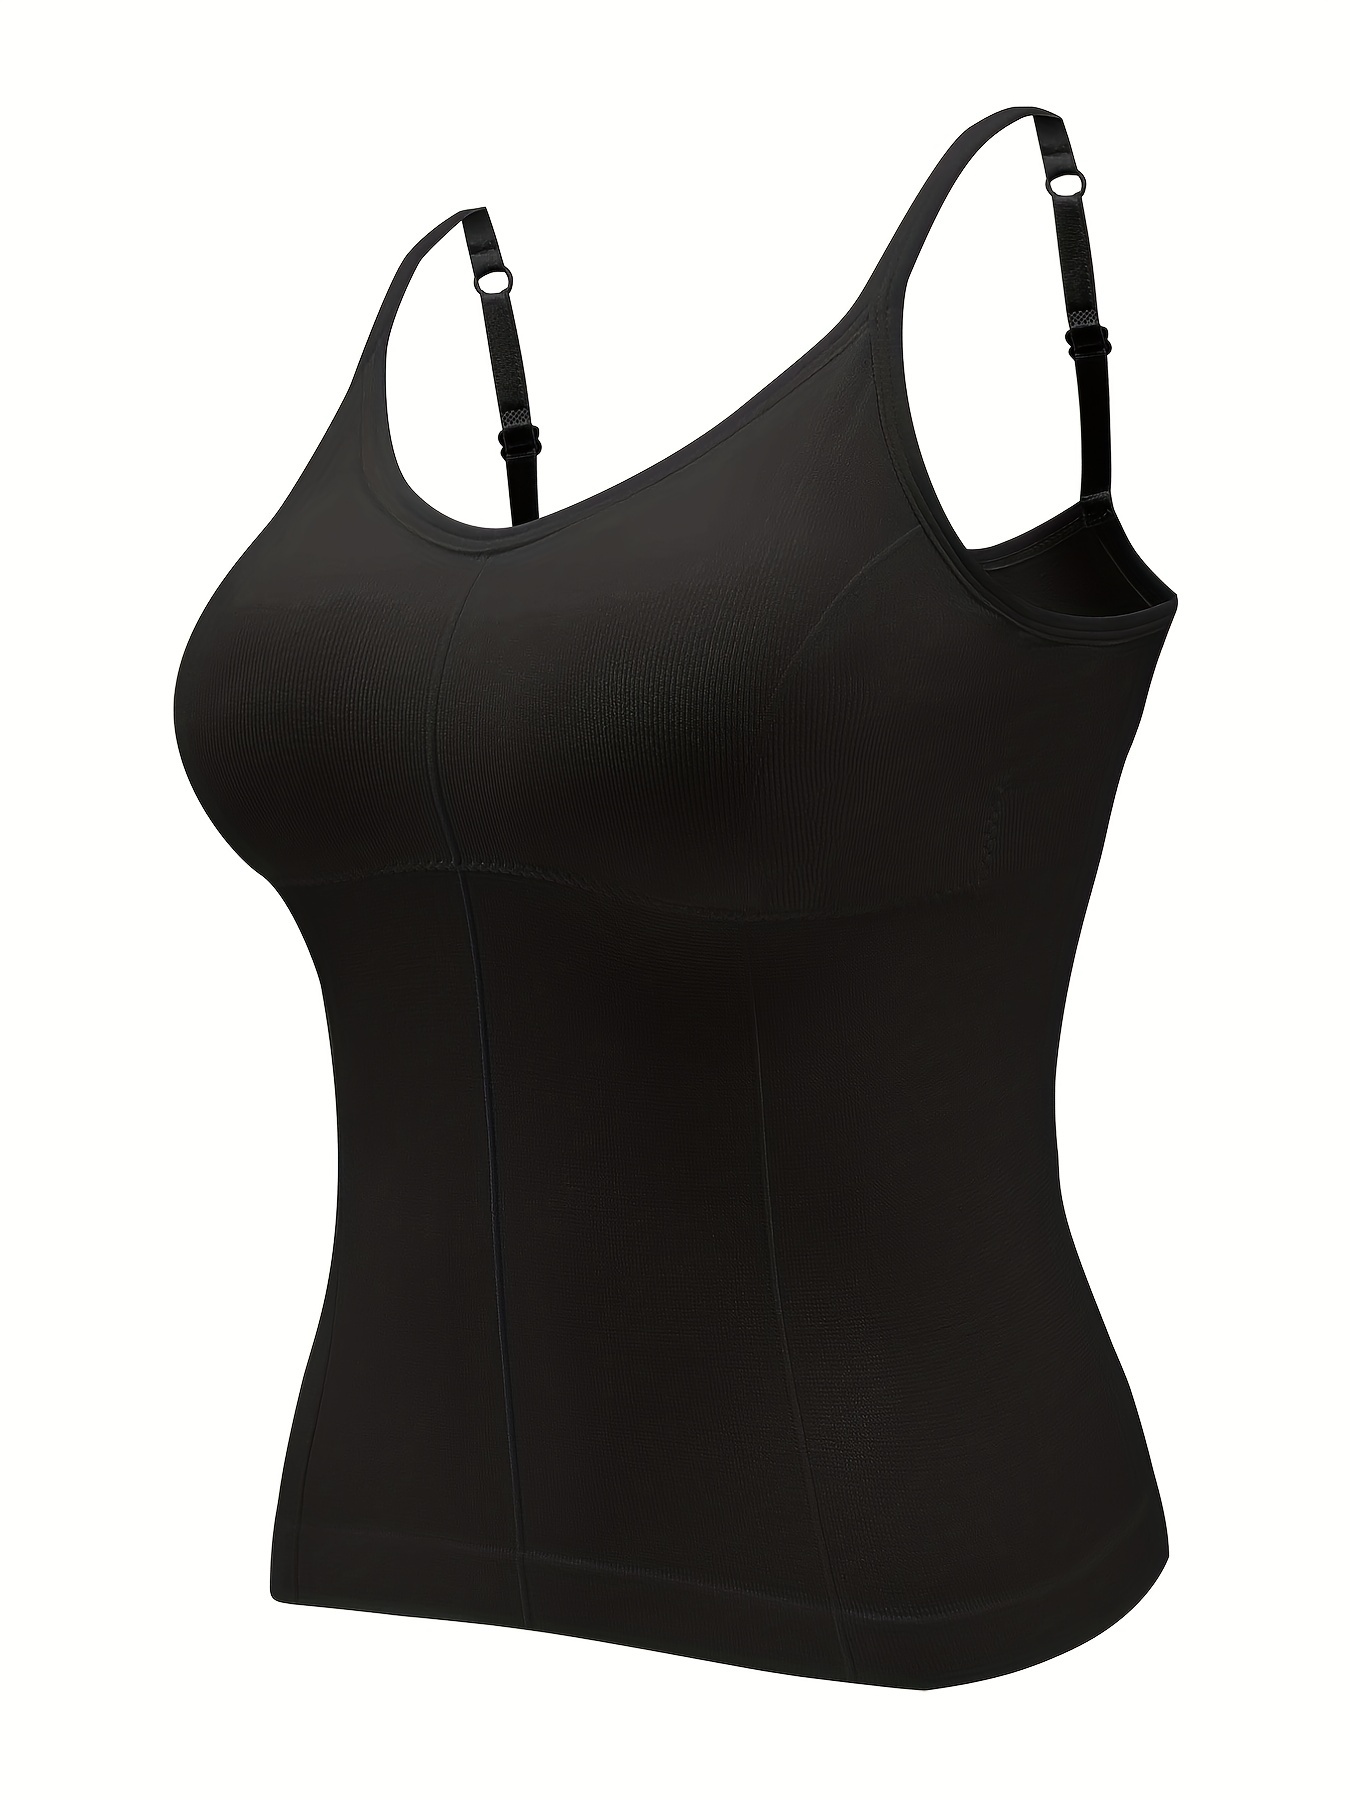 UK Women's Seamless Tank Tops Camisole with Built in Bra Corset